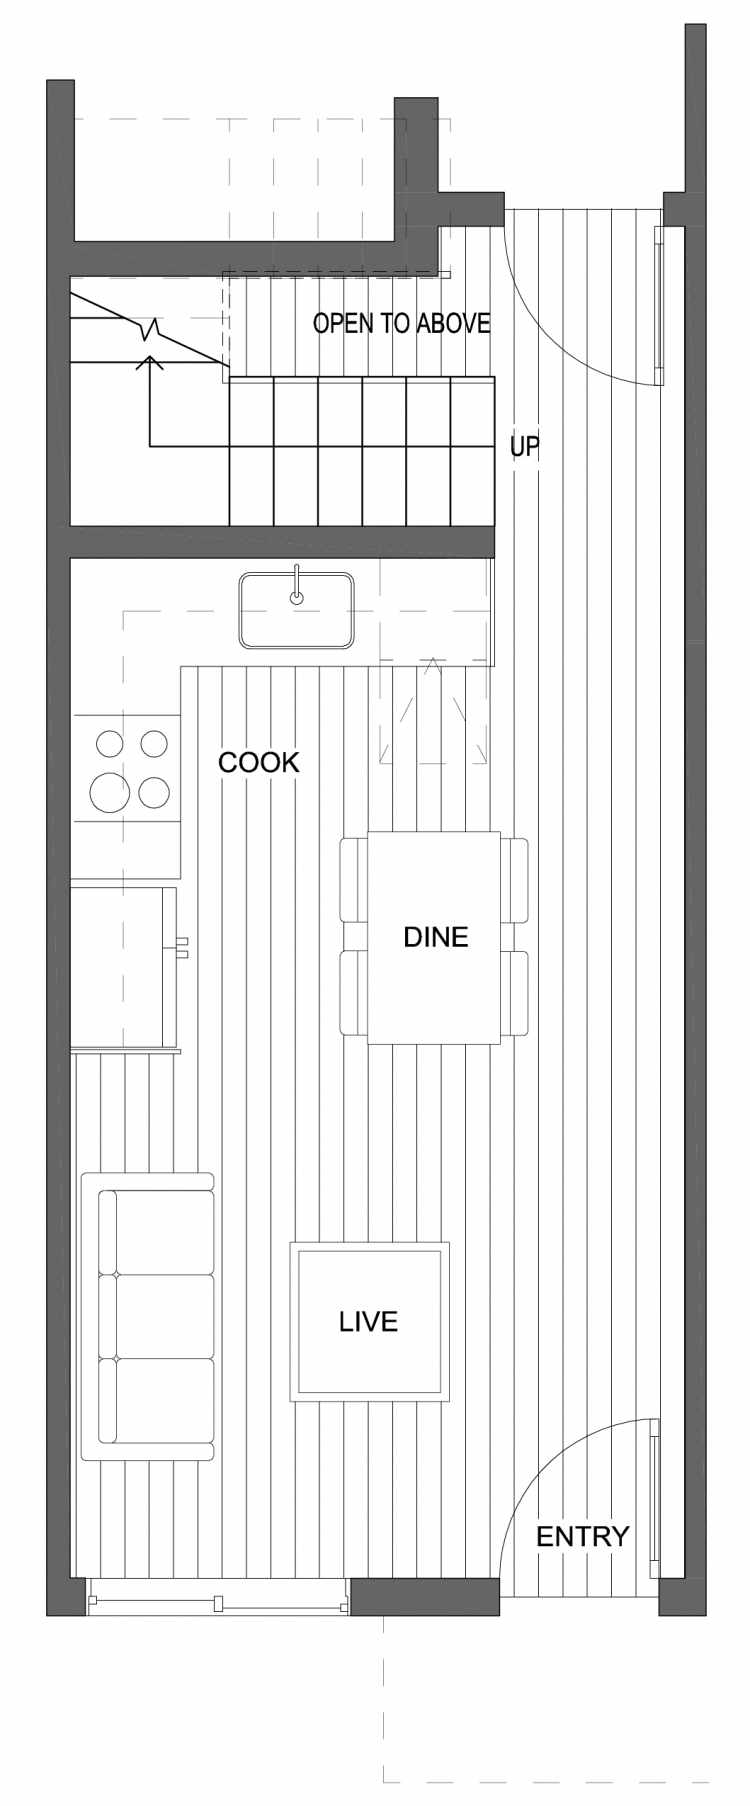 First Floor Plan of 10429D Alderbrook Pl NW, One of the Jasmine Townhomes in the Greenwood Neighborhood of Seattle